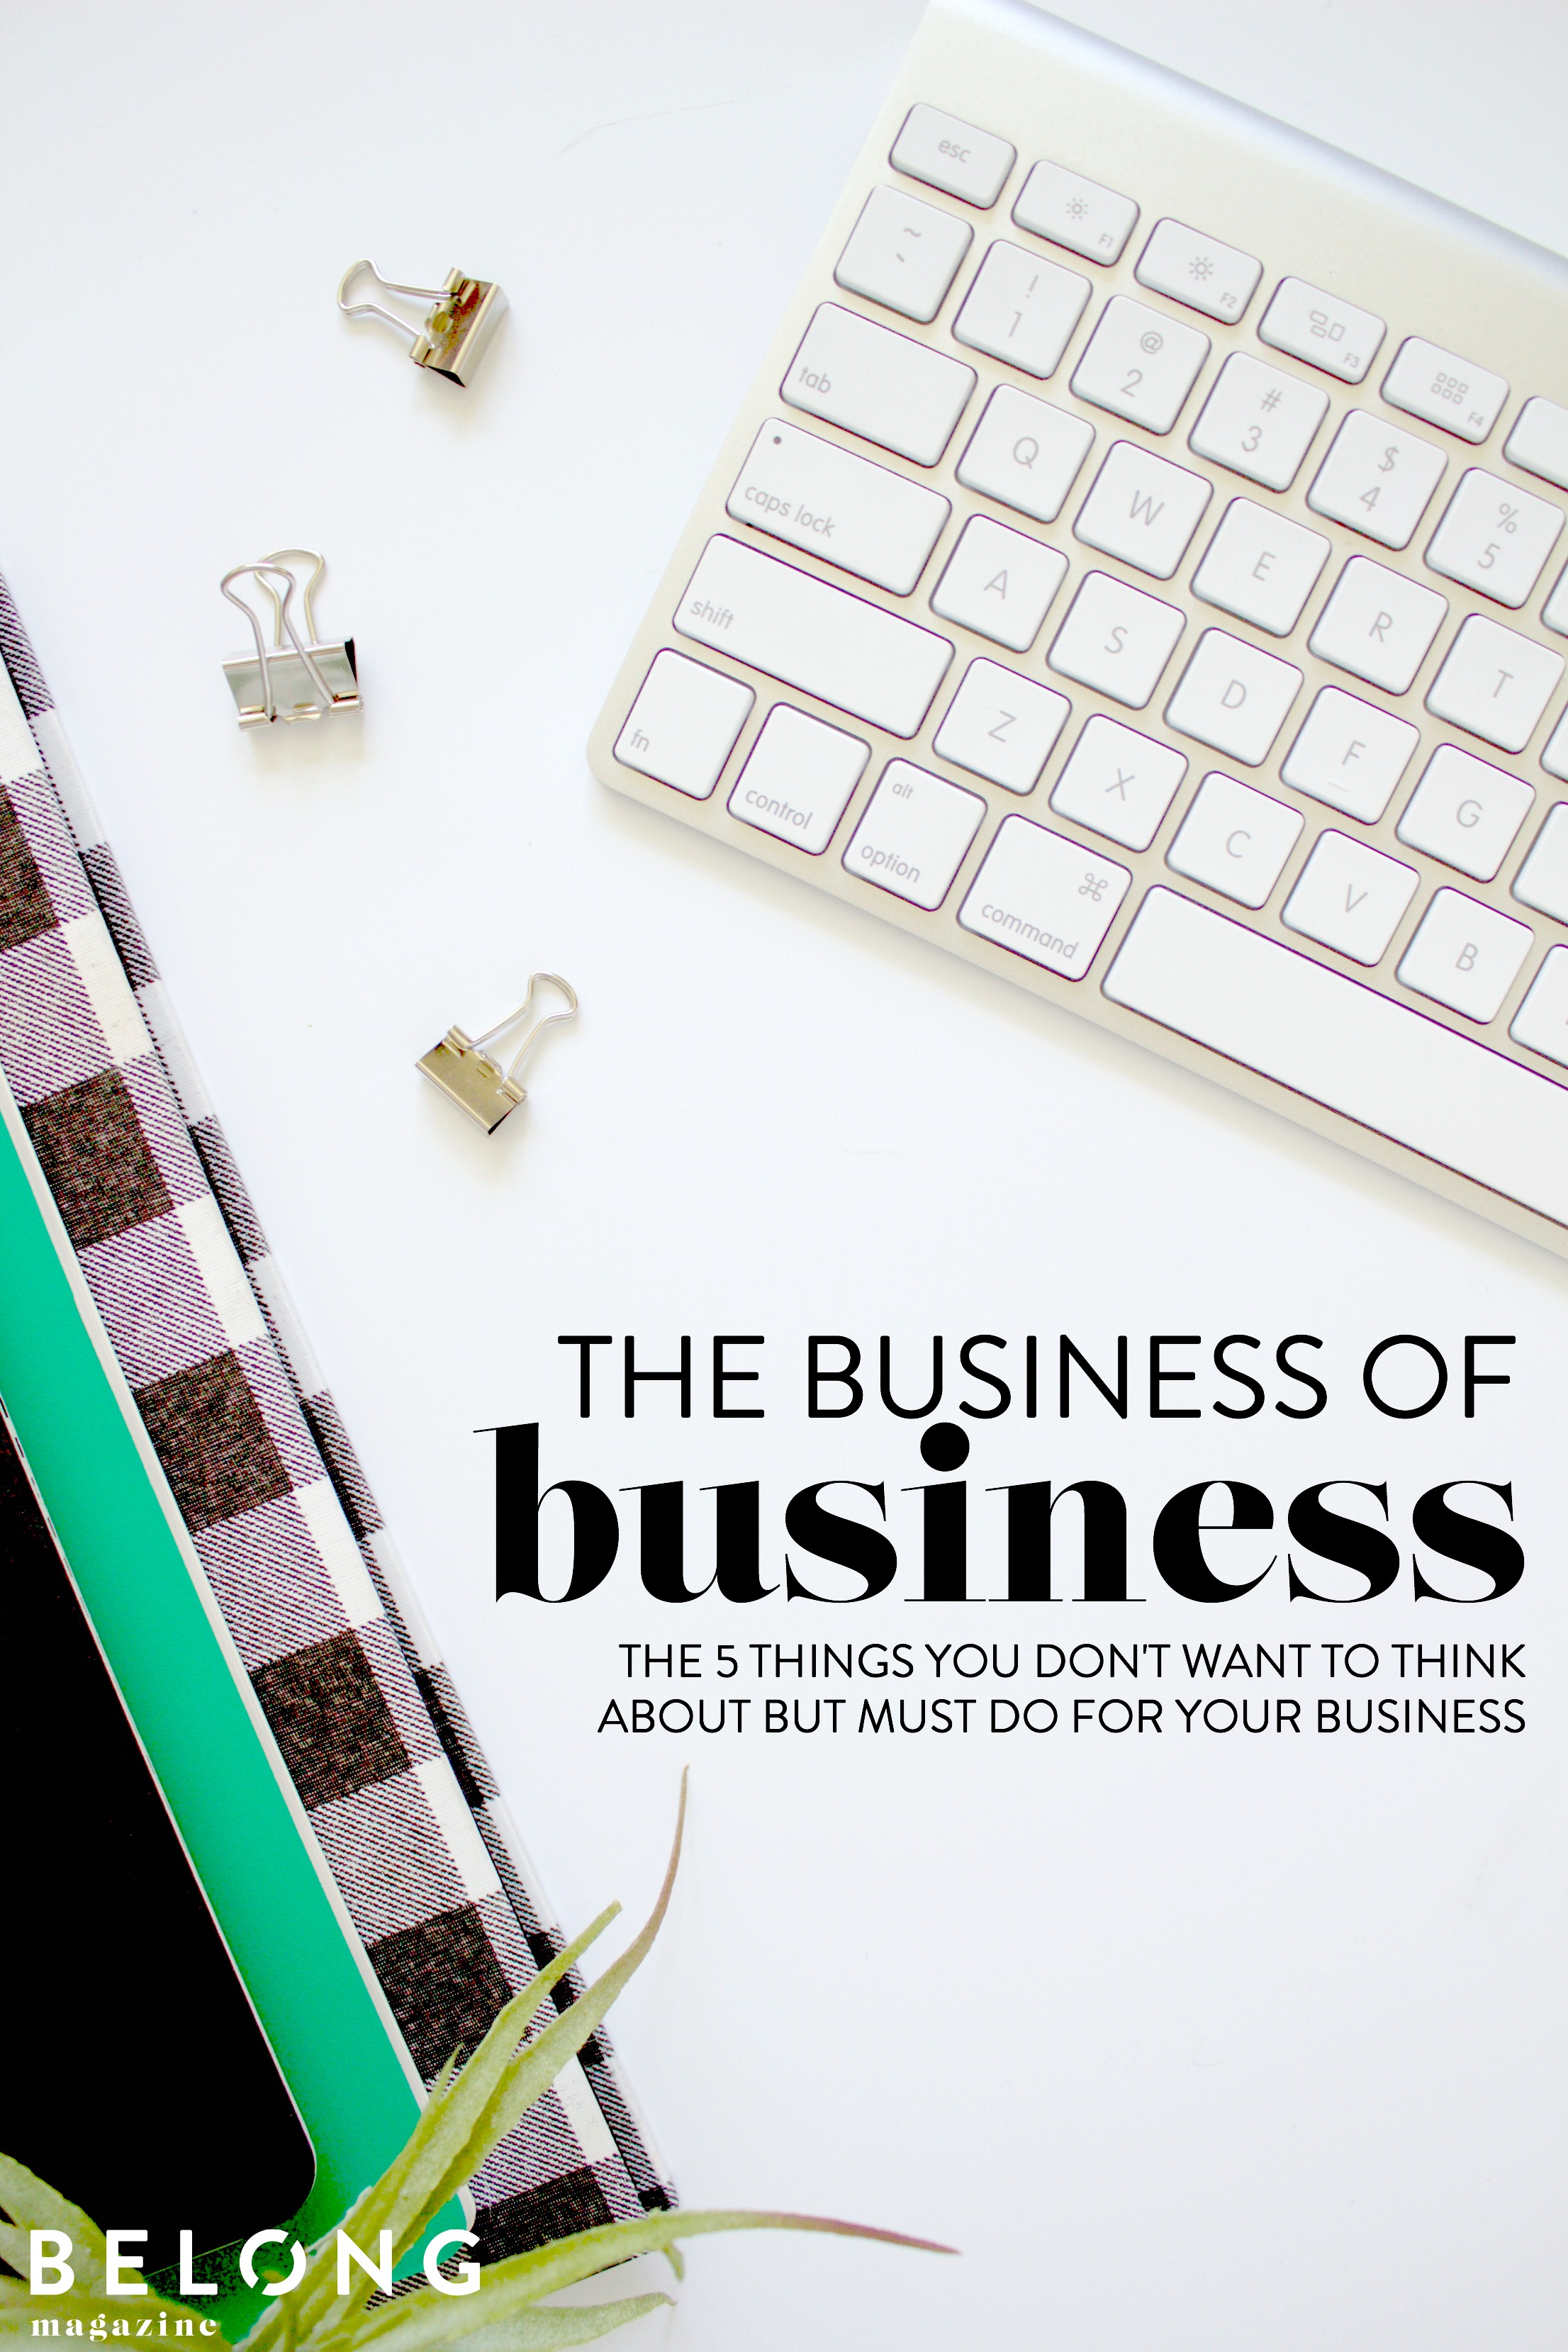 the business of business-2.jpg